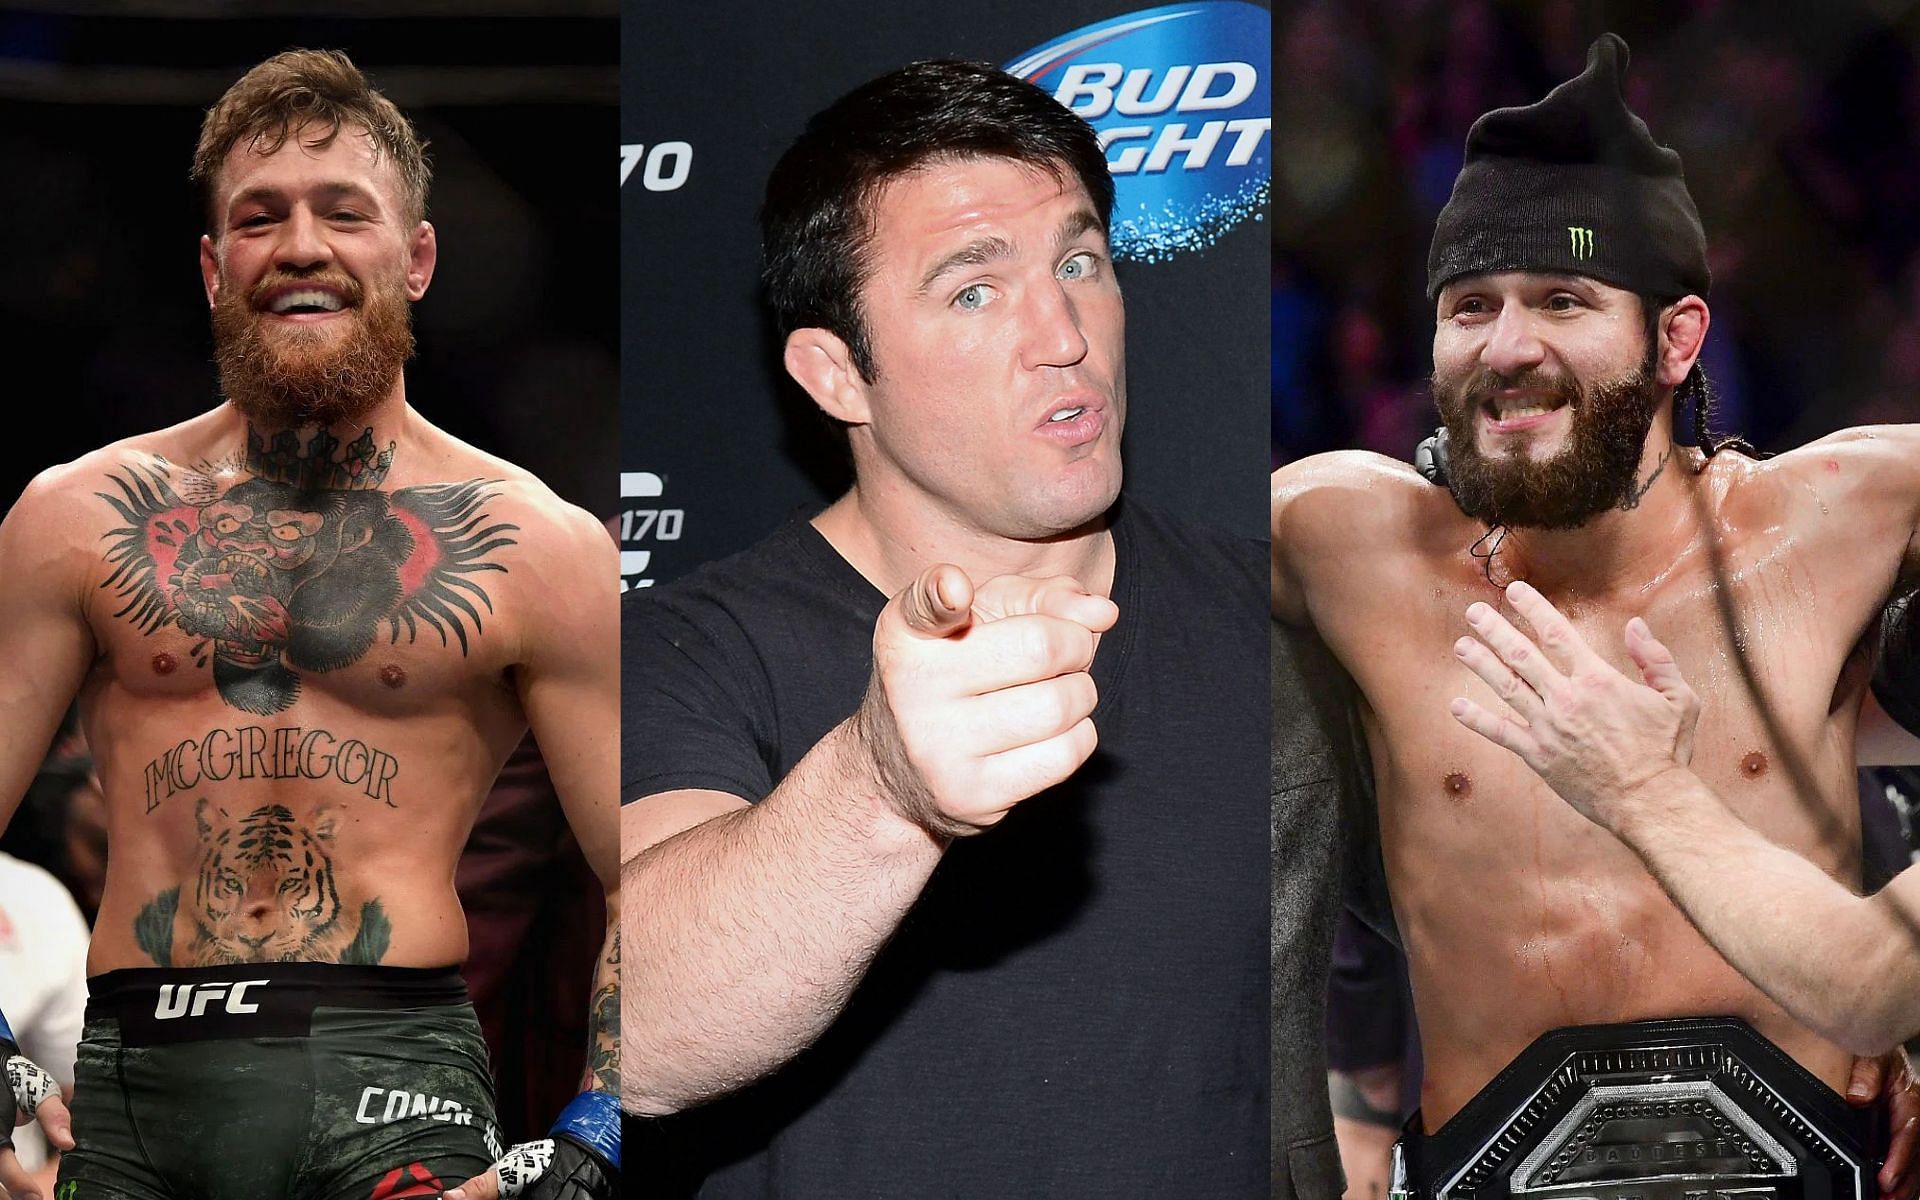 Conor McGregor (left), Chael Sonnen (middle) and Jorge Masvidal (right) 